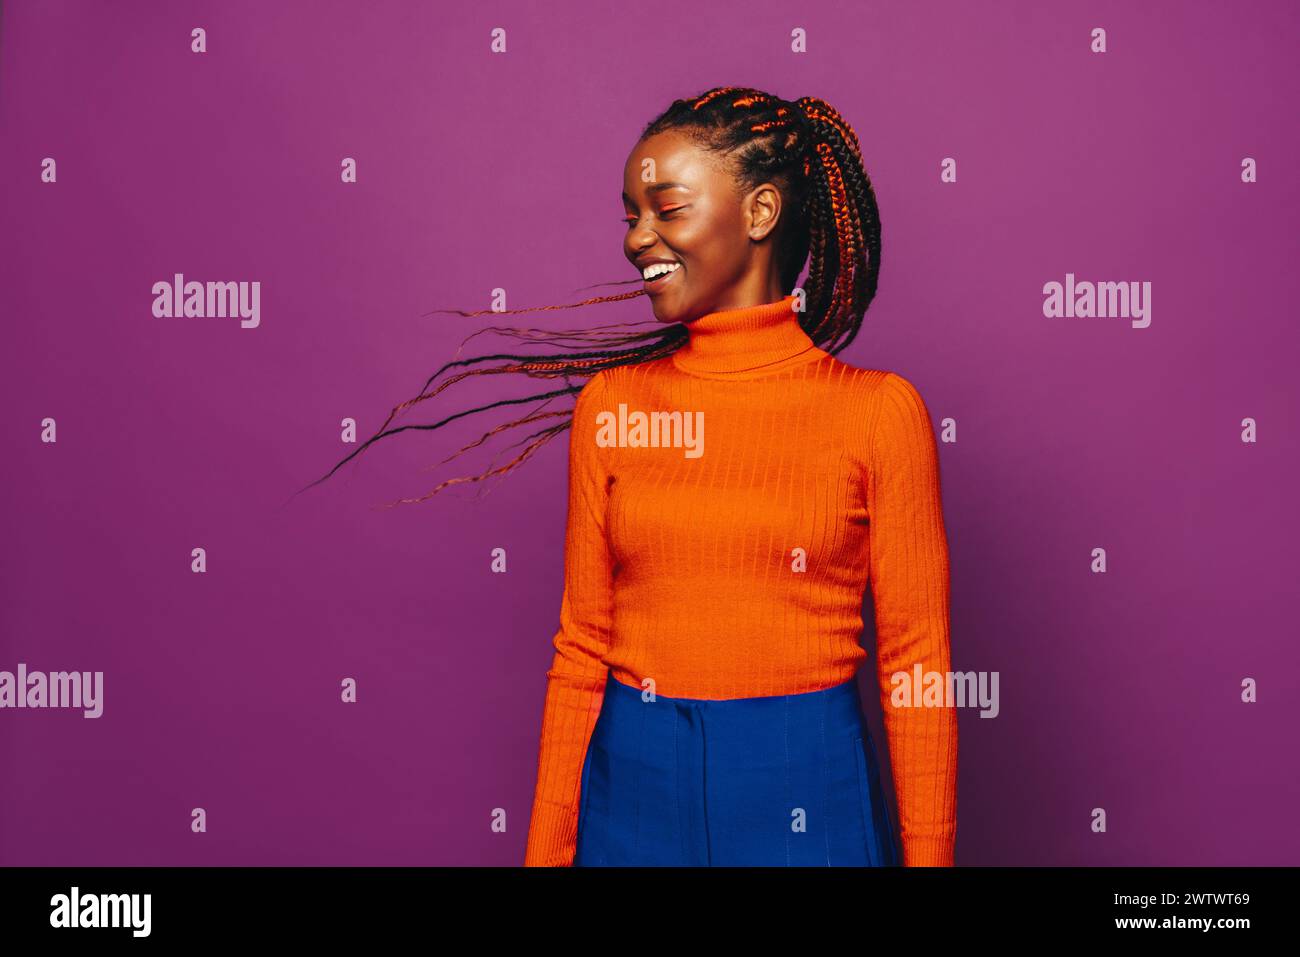 African Gen Z woman with stylish two-tone braids stands in a studio with a vibrant purple background. She wears casual clothing, including jeans and a Stock Photo